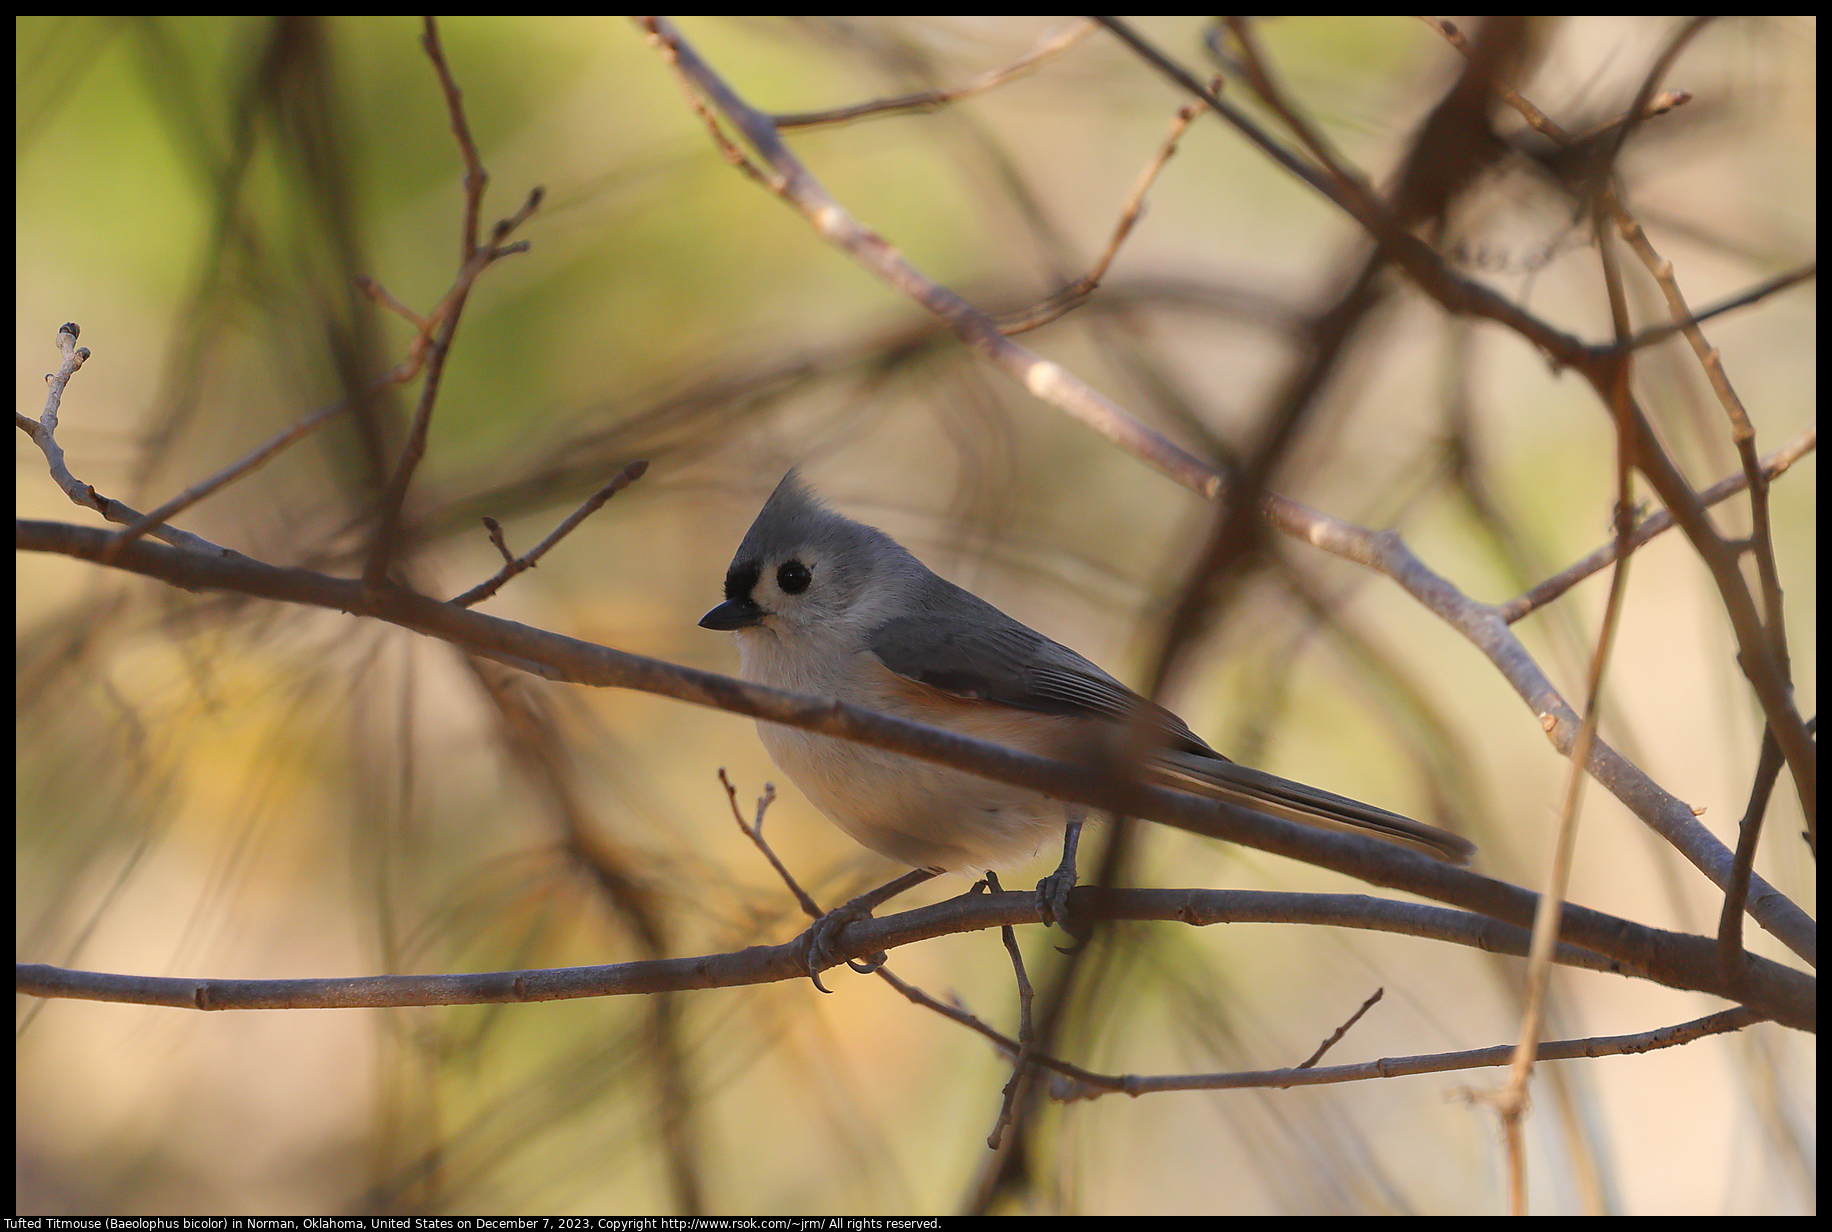 Tufted Titmouse (Baeolophus bicolor) in Norman, Oklahoma, United States on December 7, 2023